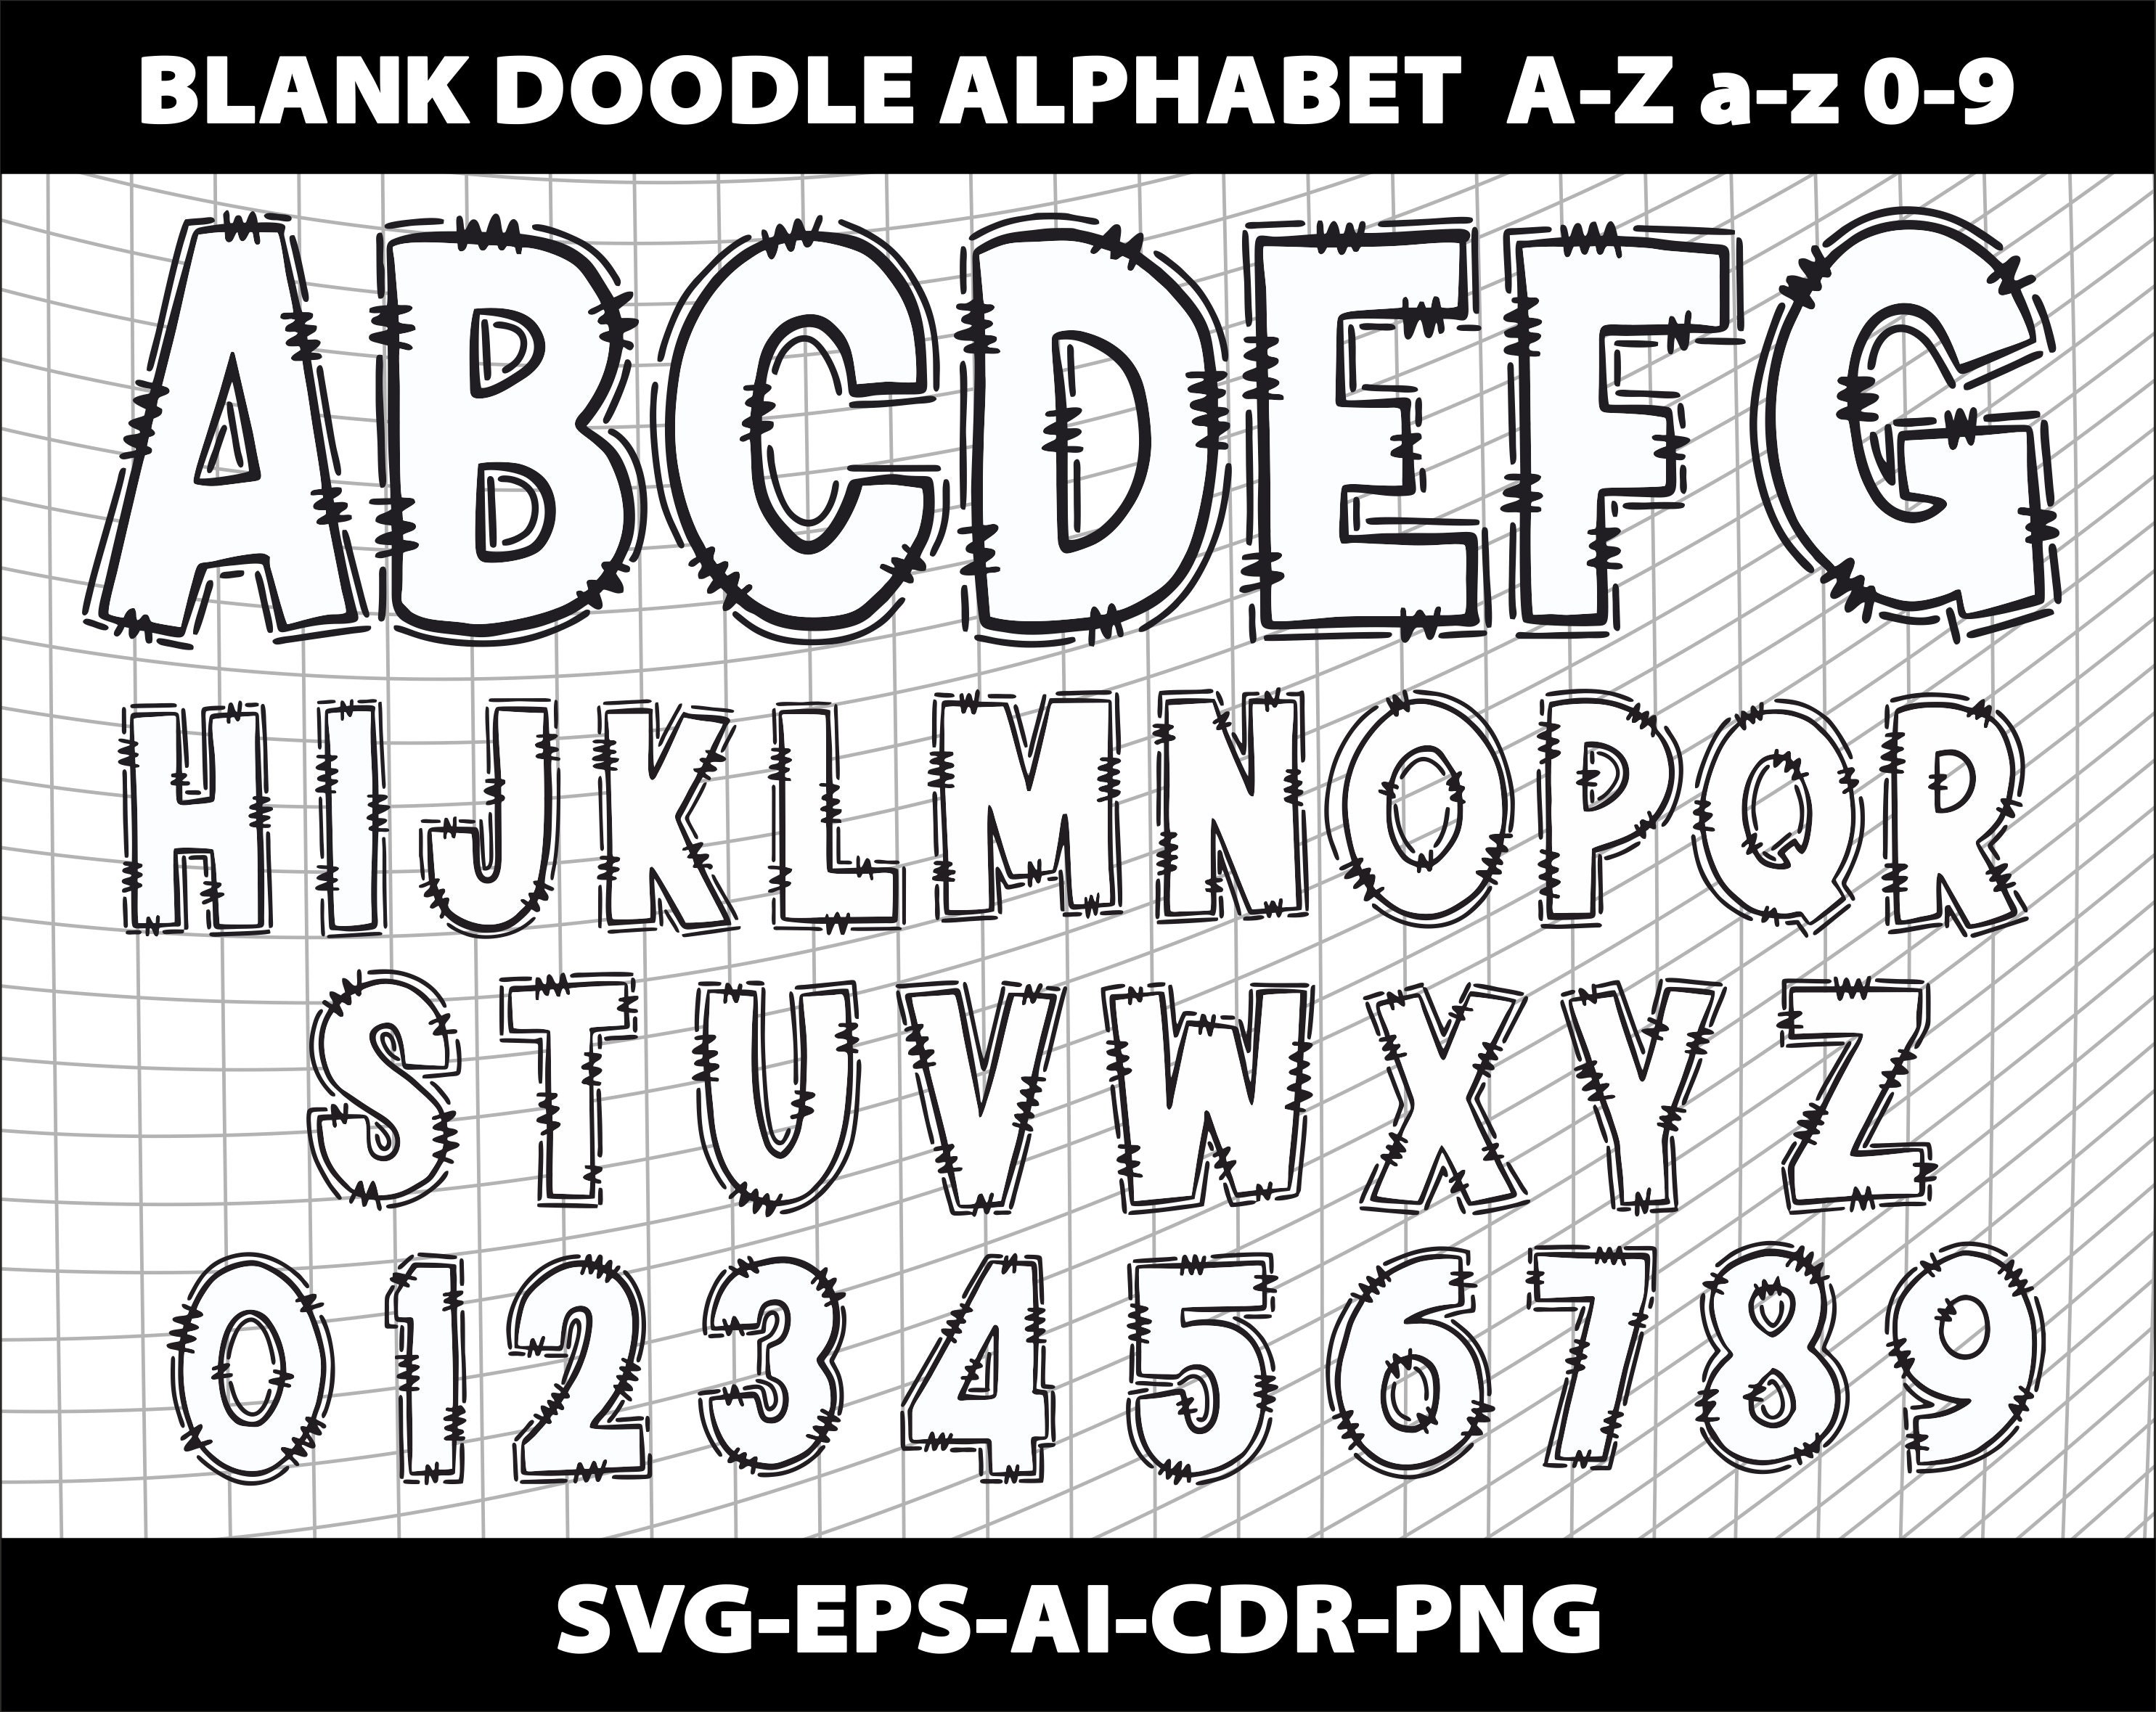 One Document Complete Alphabet Lore Bundle, Uppercase, Lowercase and Number  epssvgpngpdf, Blank and Colorful Alphabet Lore, Digital Alph 